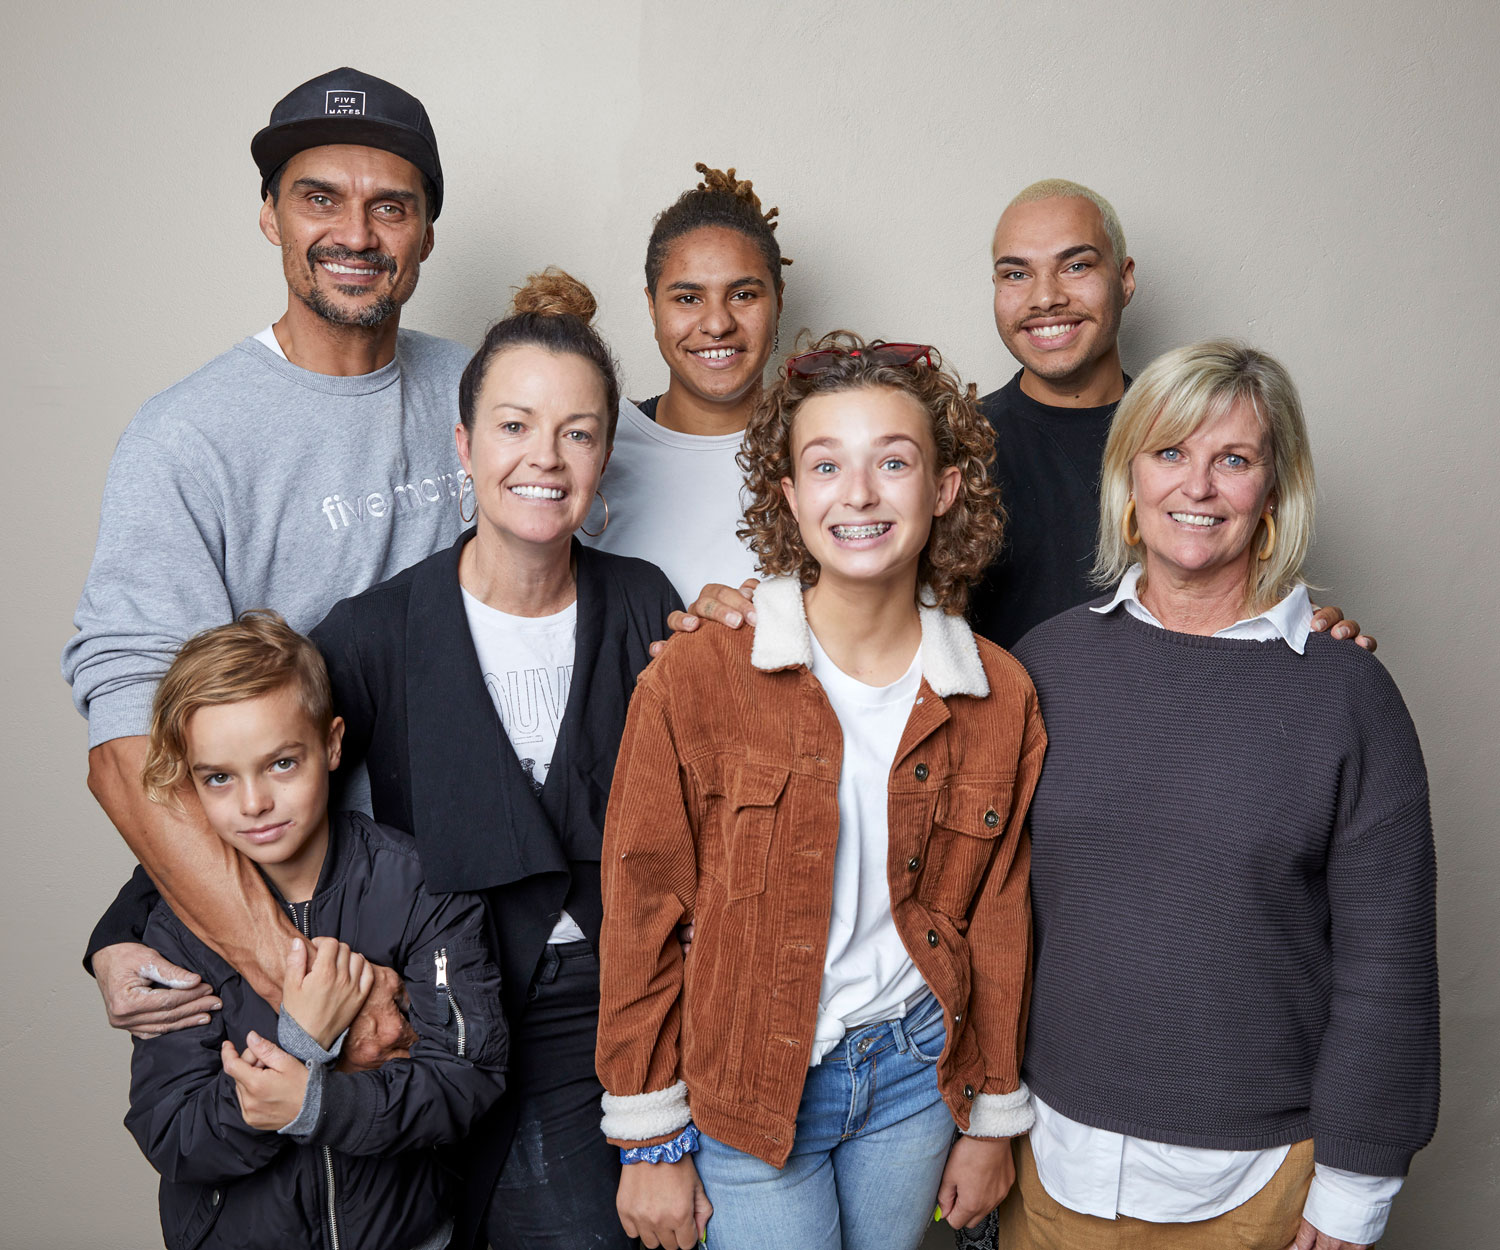 The Block’s Deb and Andy open up on their family: “Becoming foster parents changed us”